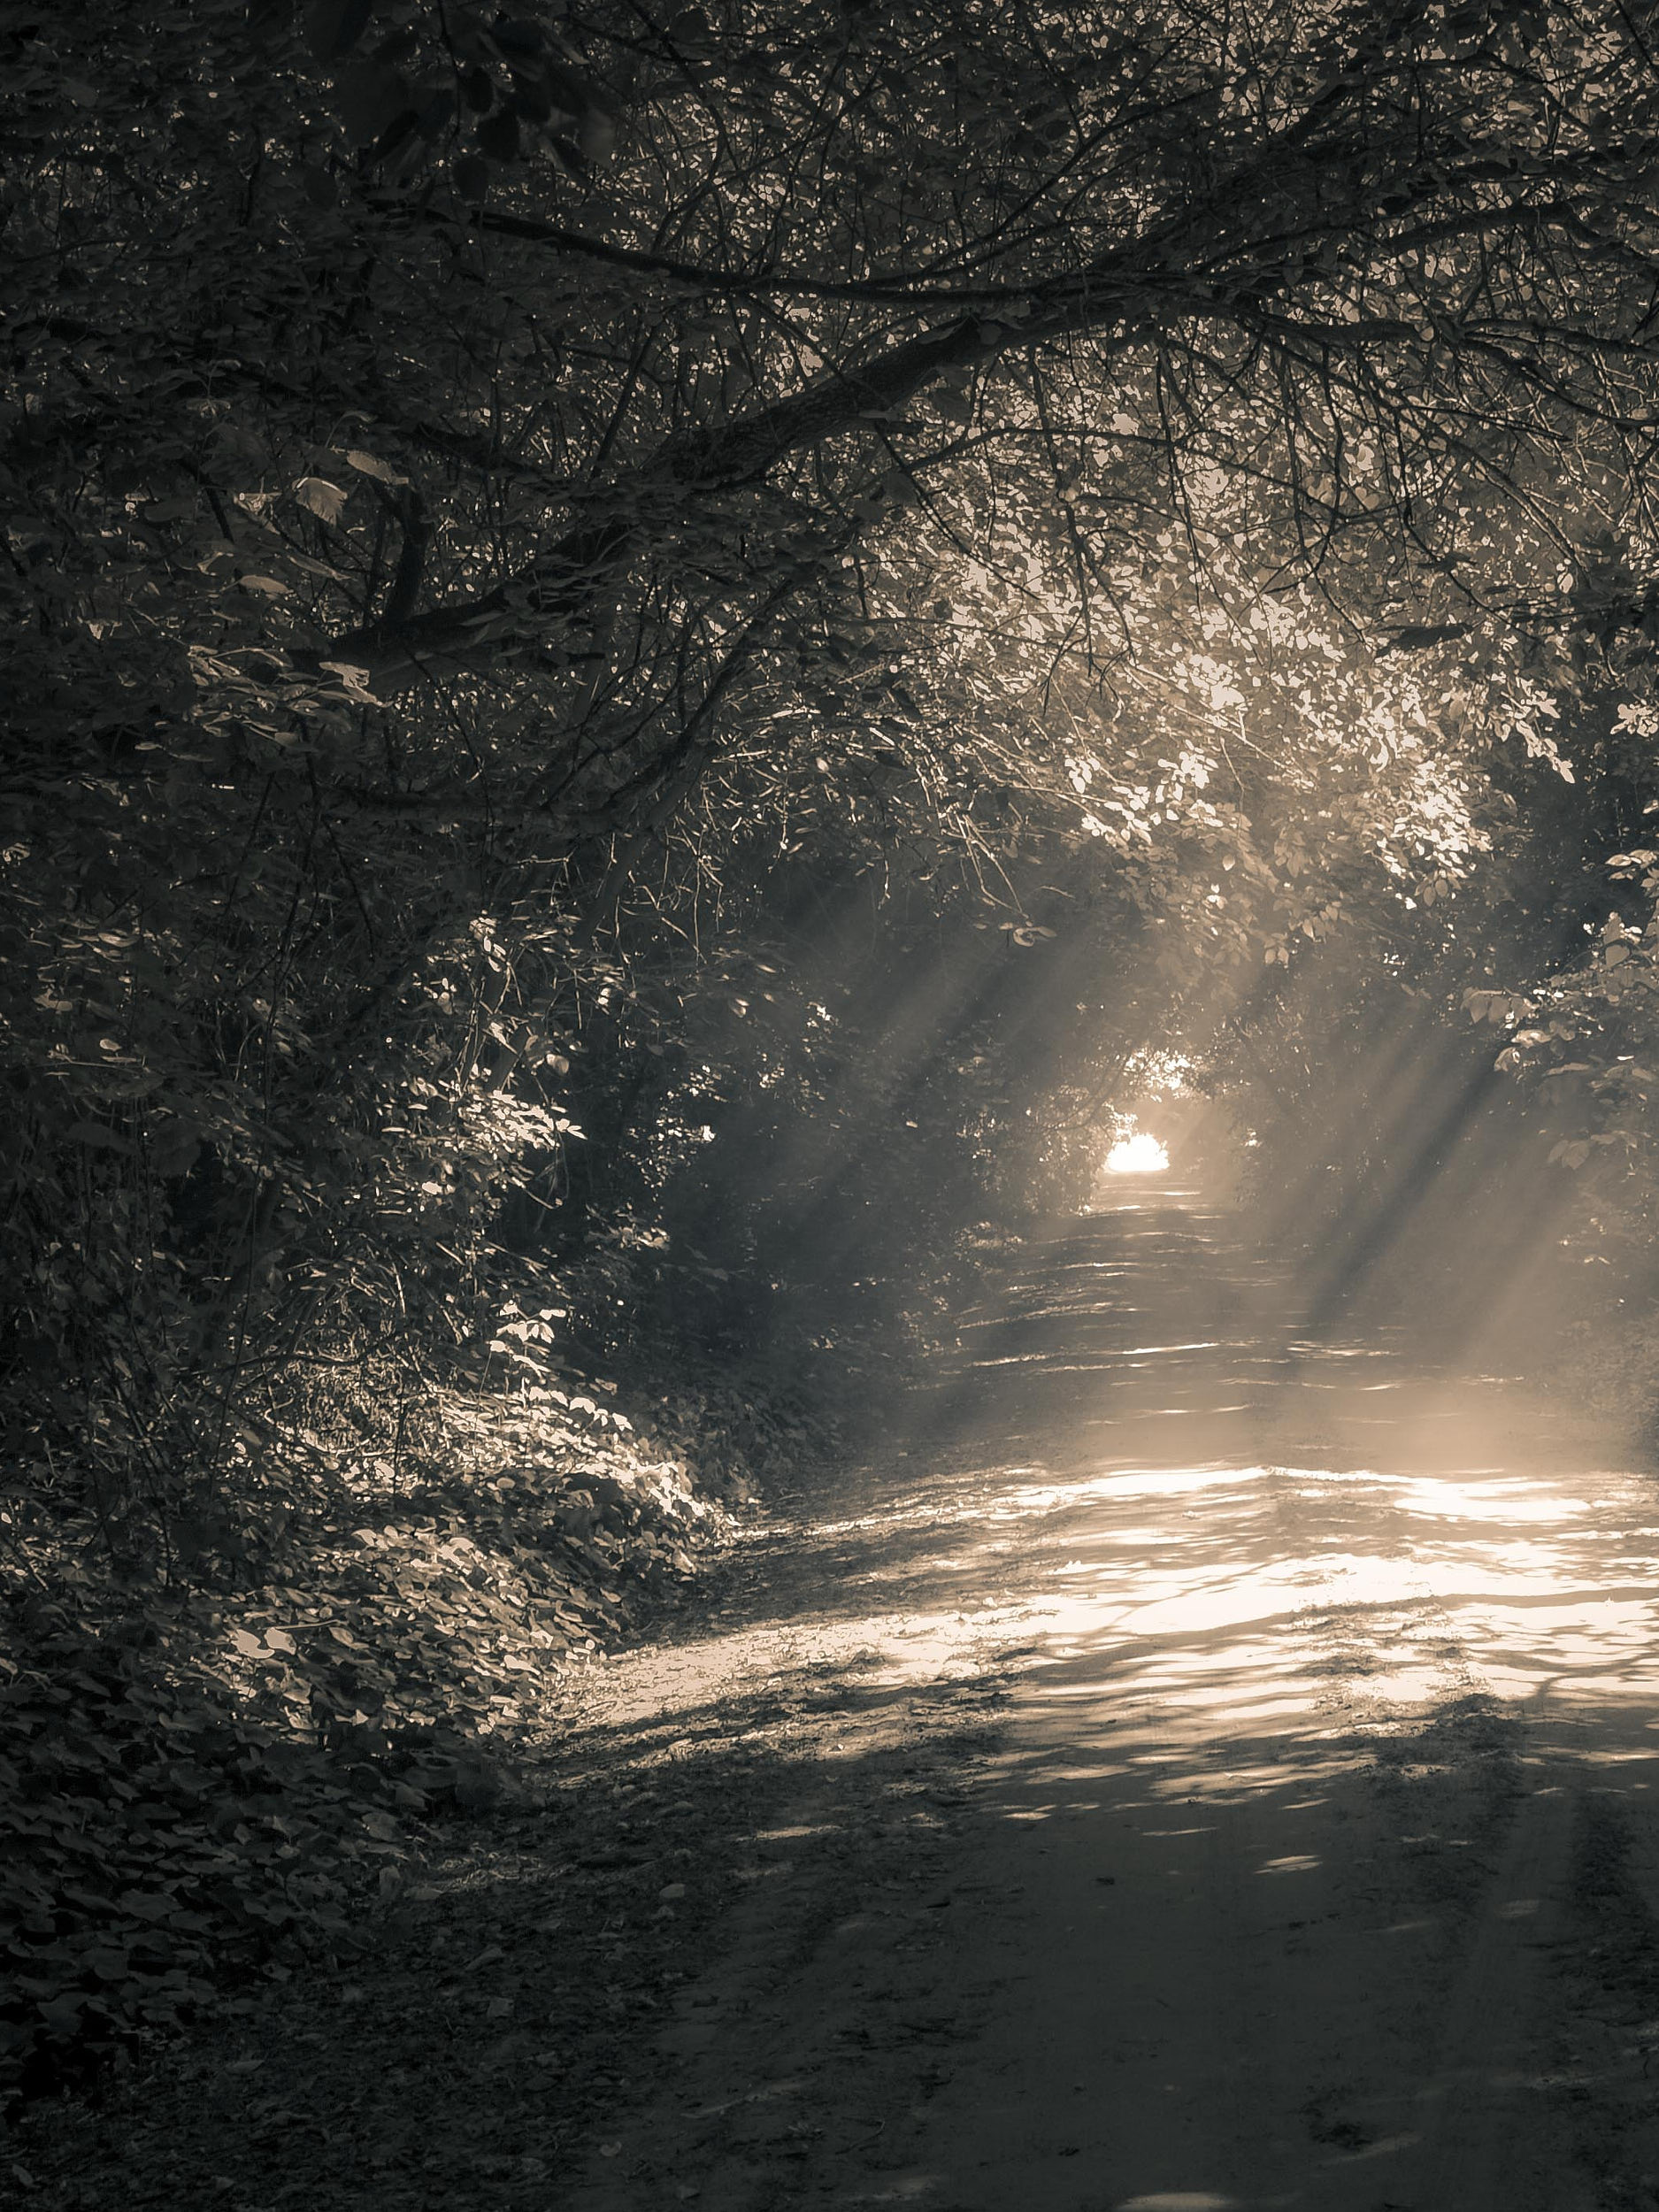 A monochrome image of a road through a dense forest tunnel of trees, with a warm and inviting light at the end of the road.